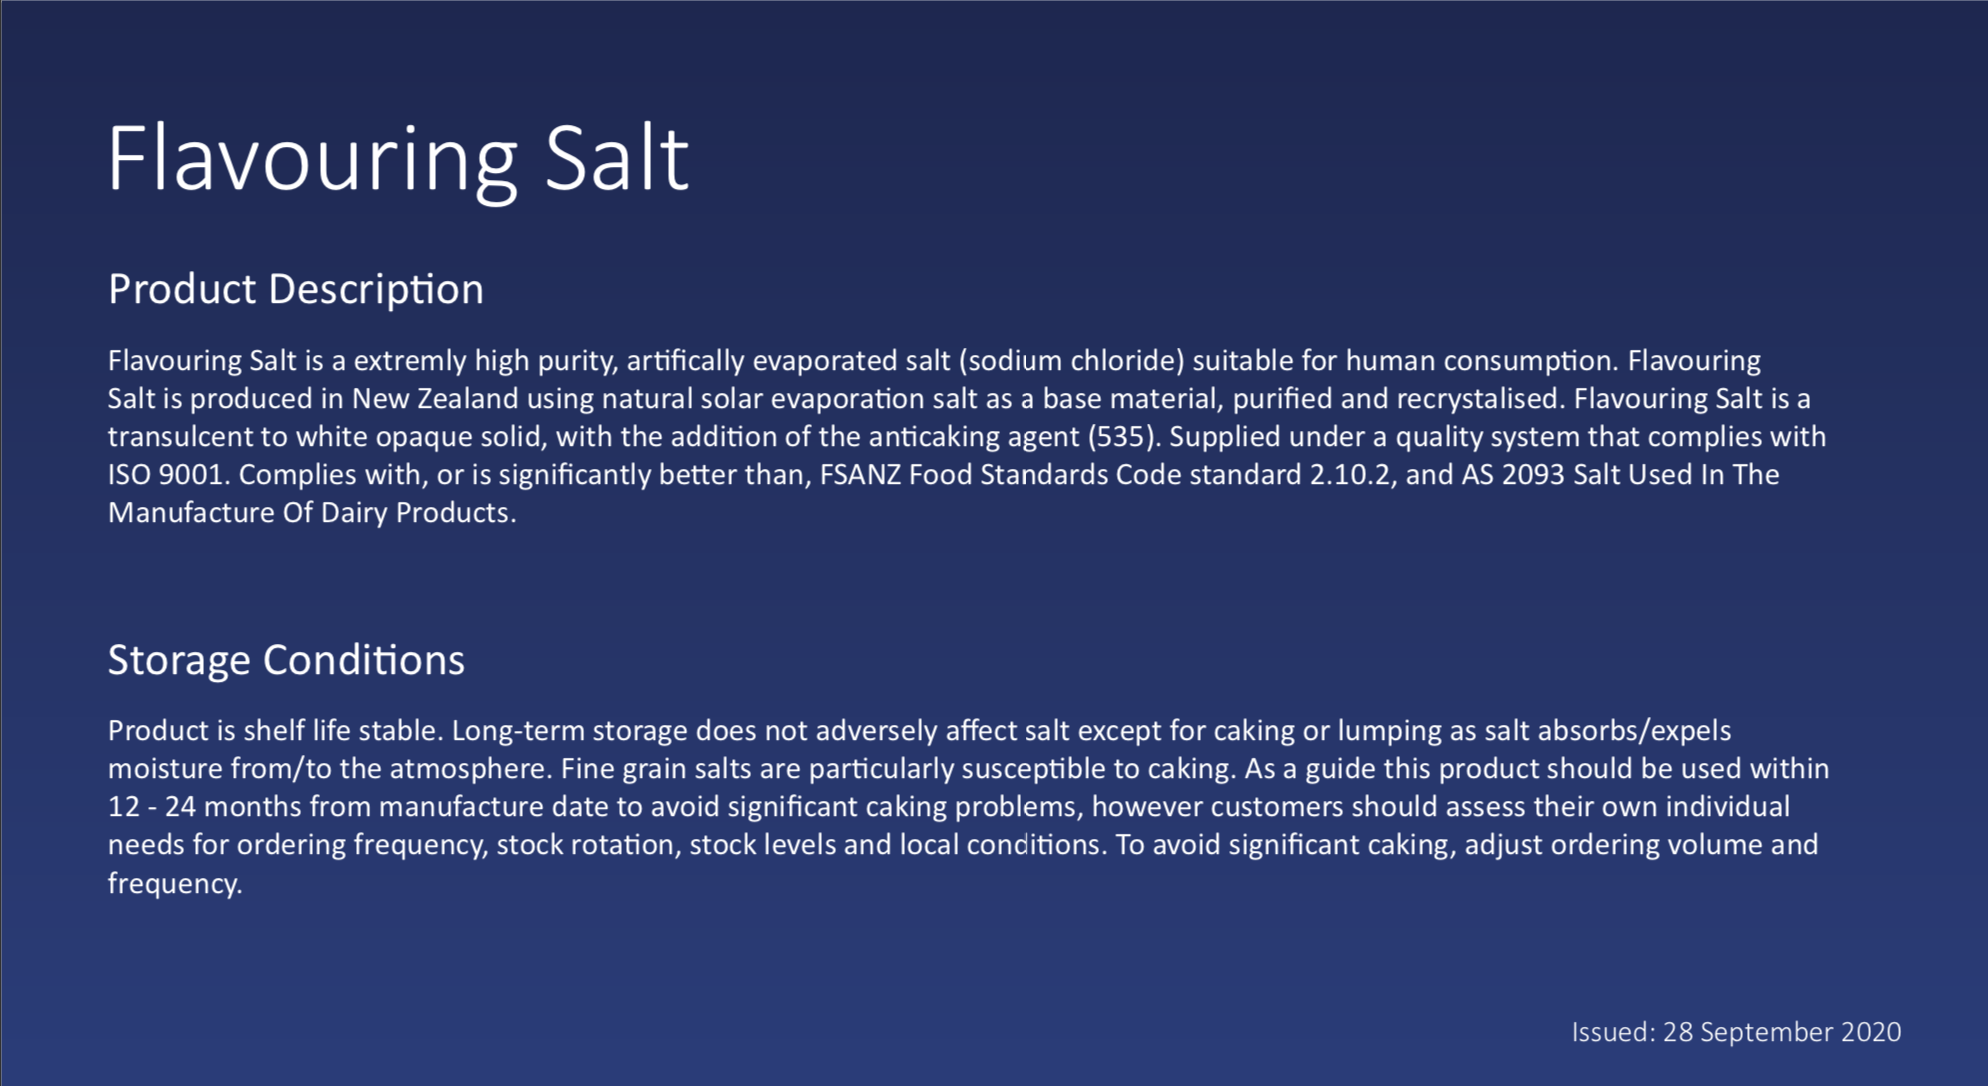 Flavouring Salt product description. Storage conditions are included for this food grade salt.